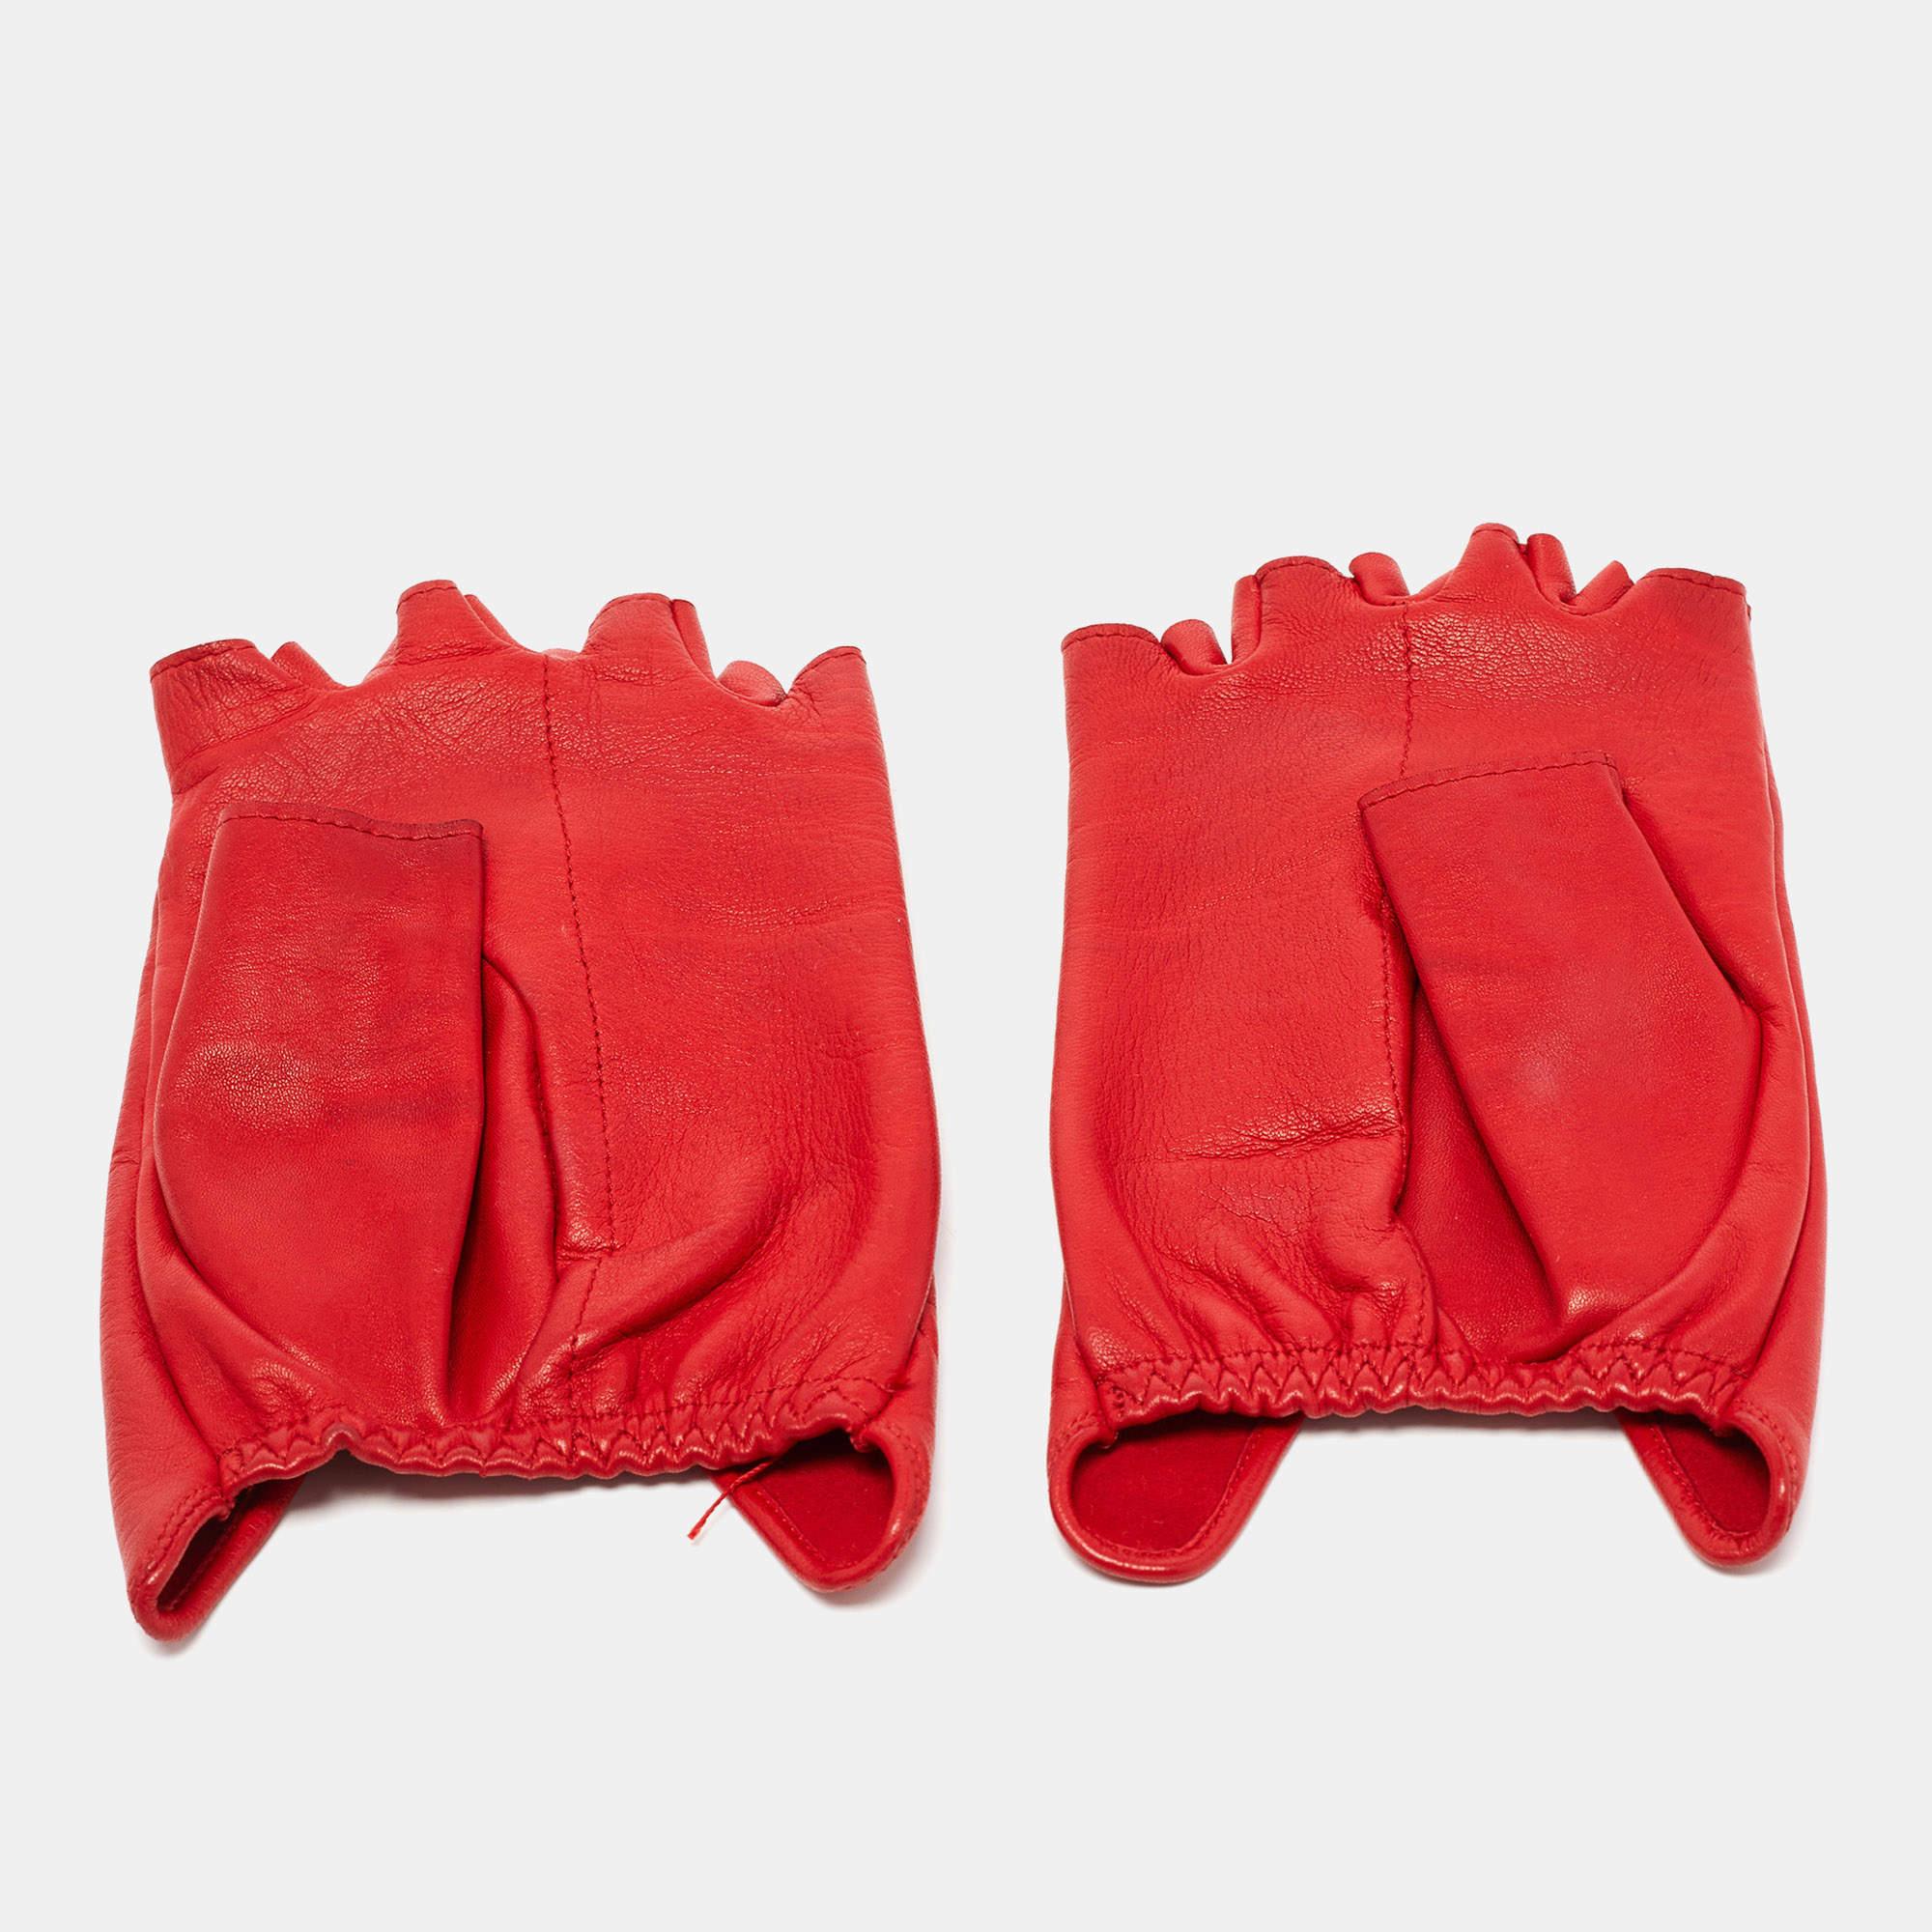 The red shade, the pearl accent, and the cuts may (at first glance) make the pair seem like a bold fashion choice, but Chanel ensures you have fun styling the gloves and wearing them often. Whether you style these fingerless gloves with a classic